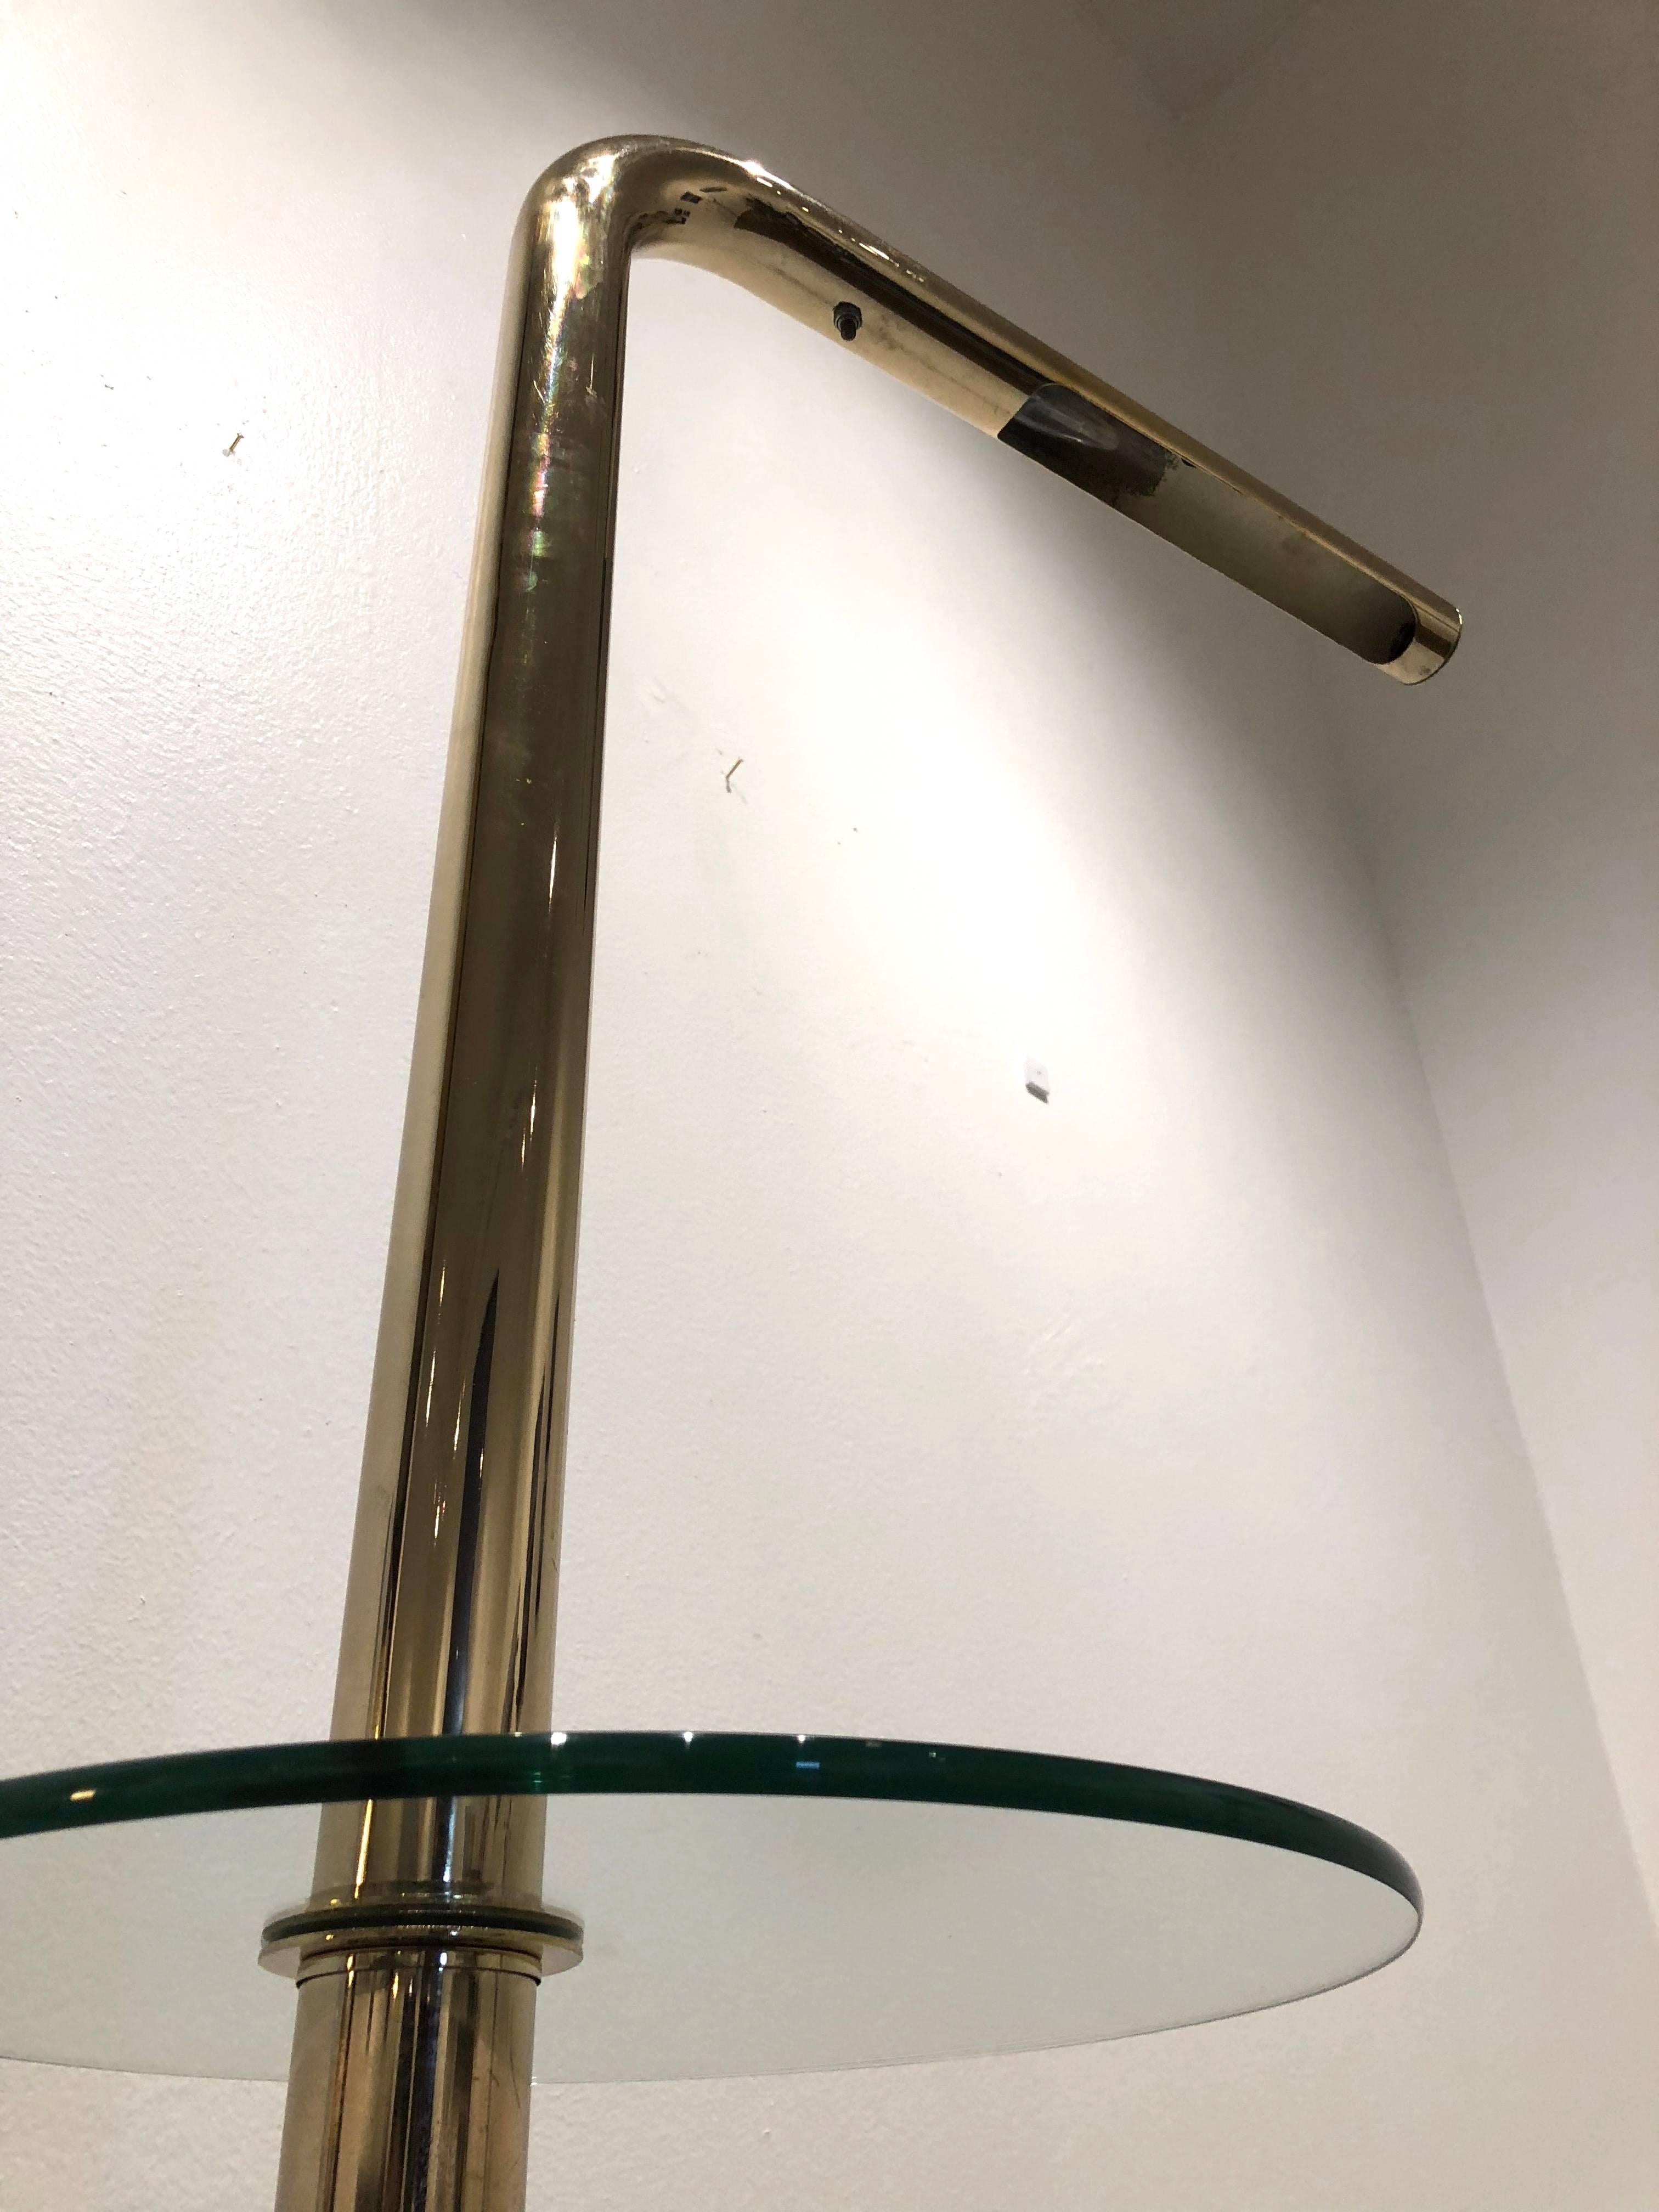 Fantastic 1970s floor lamp in a polished brass finished with glass table attached made by Robert Sonneman.